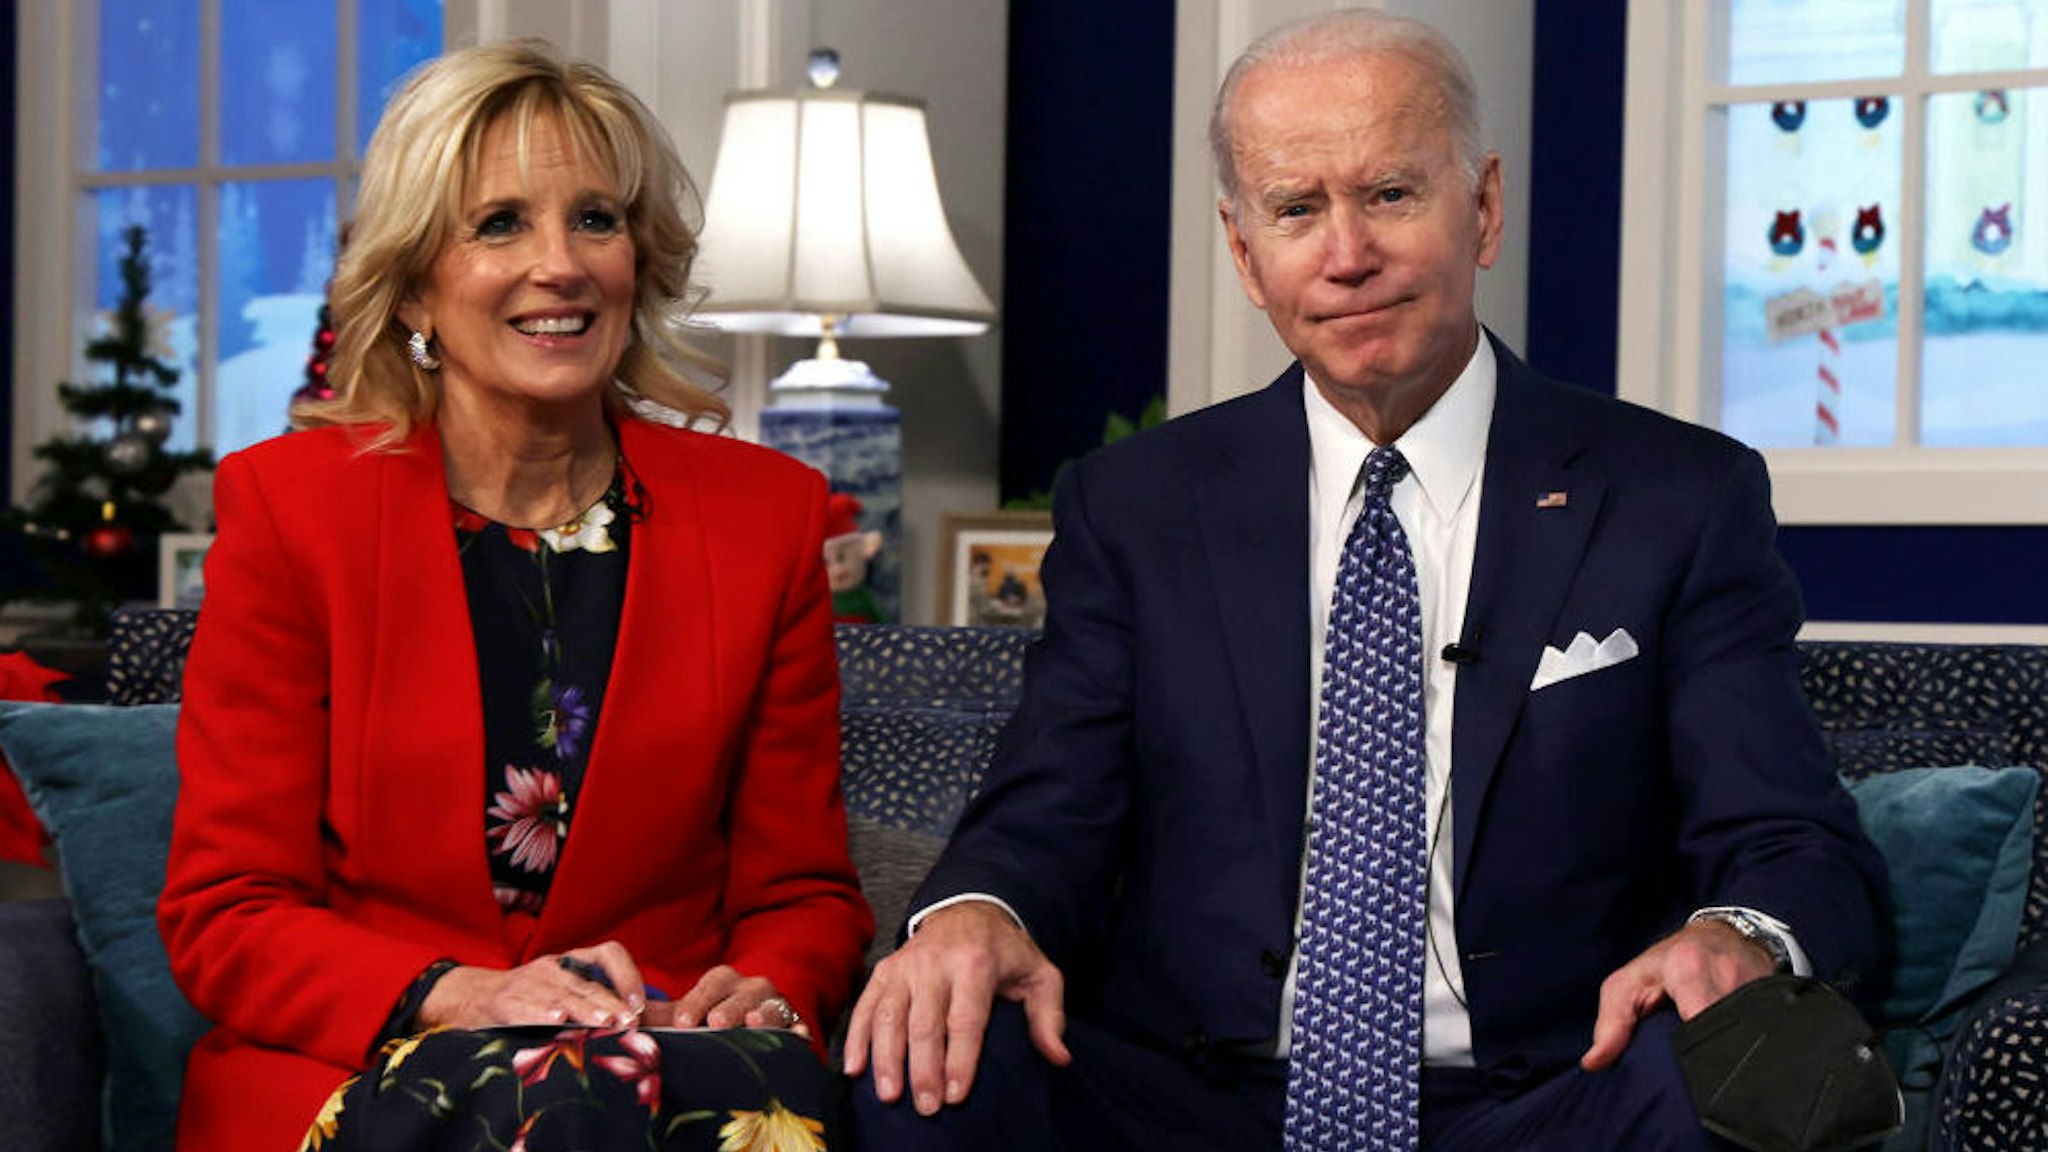 U.S. President Joe Biden and first lady Dr. Jill Biden participate in an event to call NORAD and track the path of Santa Claus on Christmas Eve in the South Court Auditorium of the Eisenhower Executive Building on December 24, 2021 in Washington, DC.